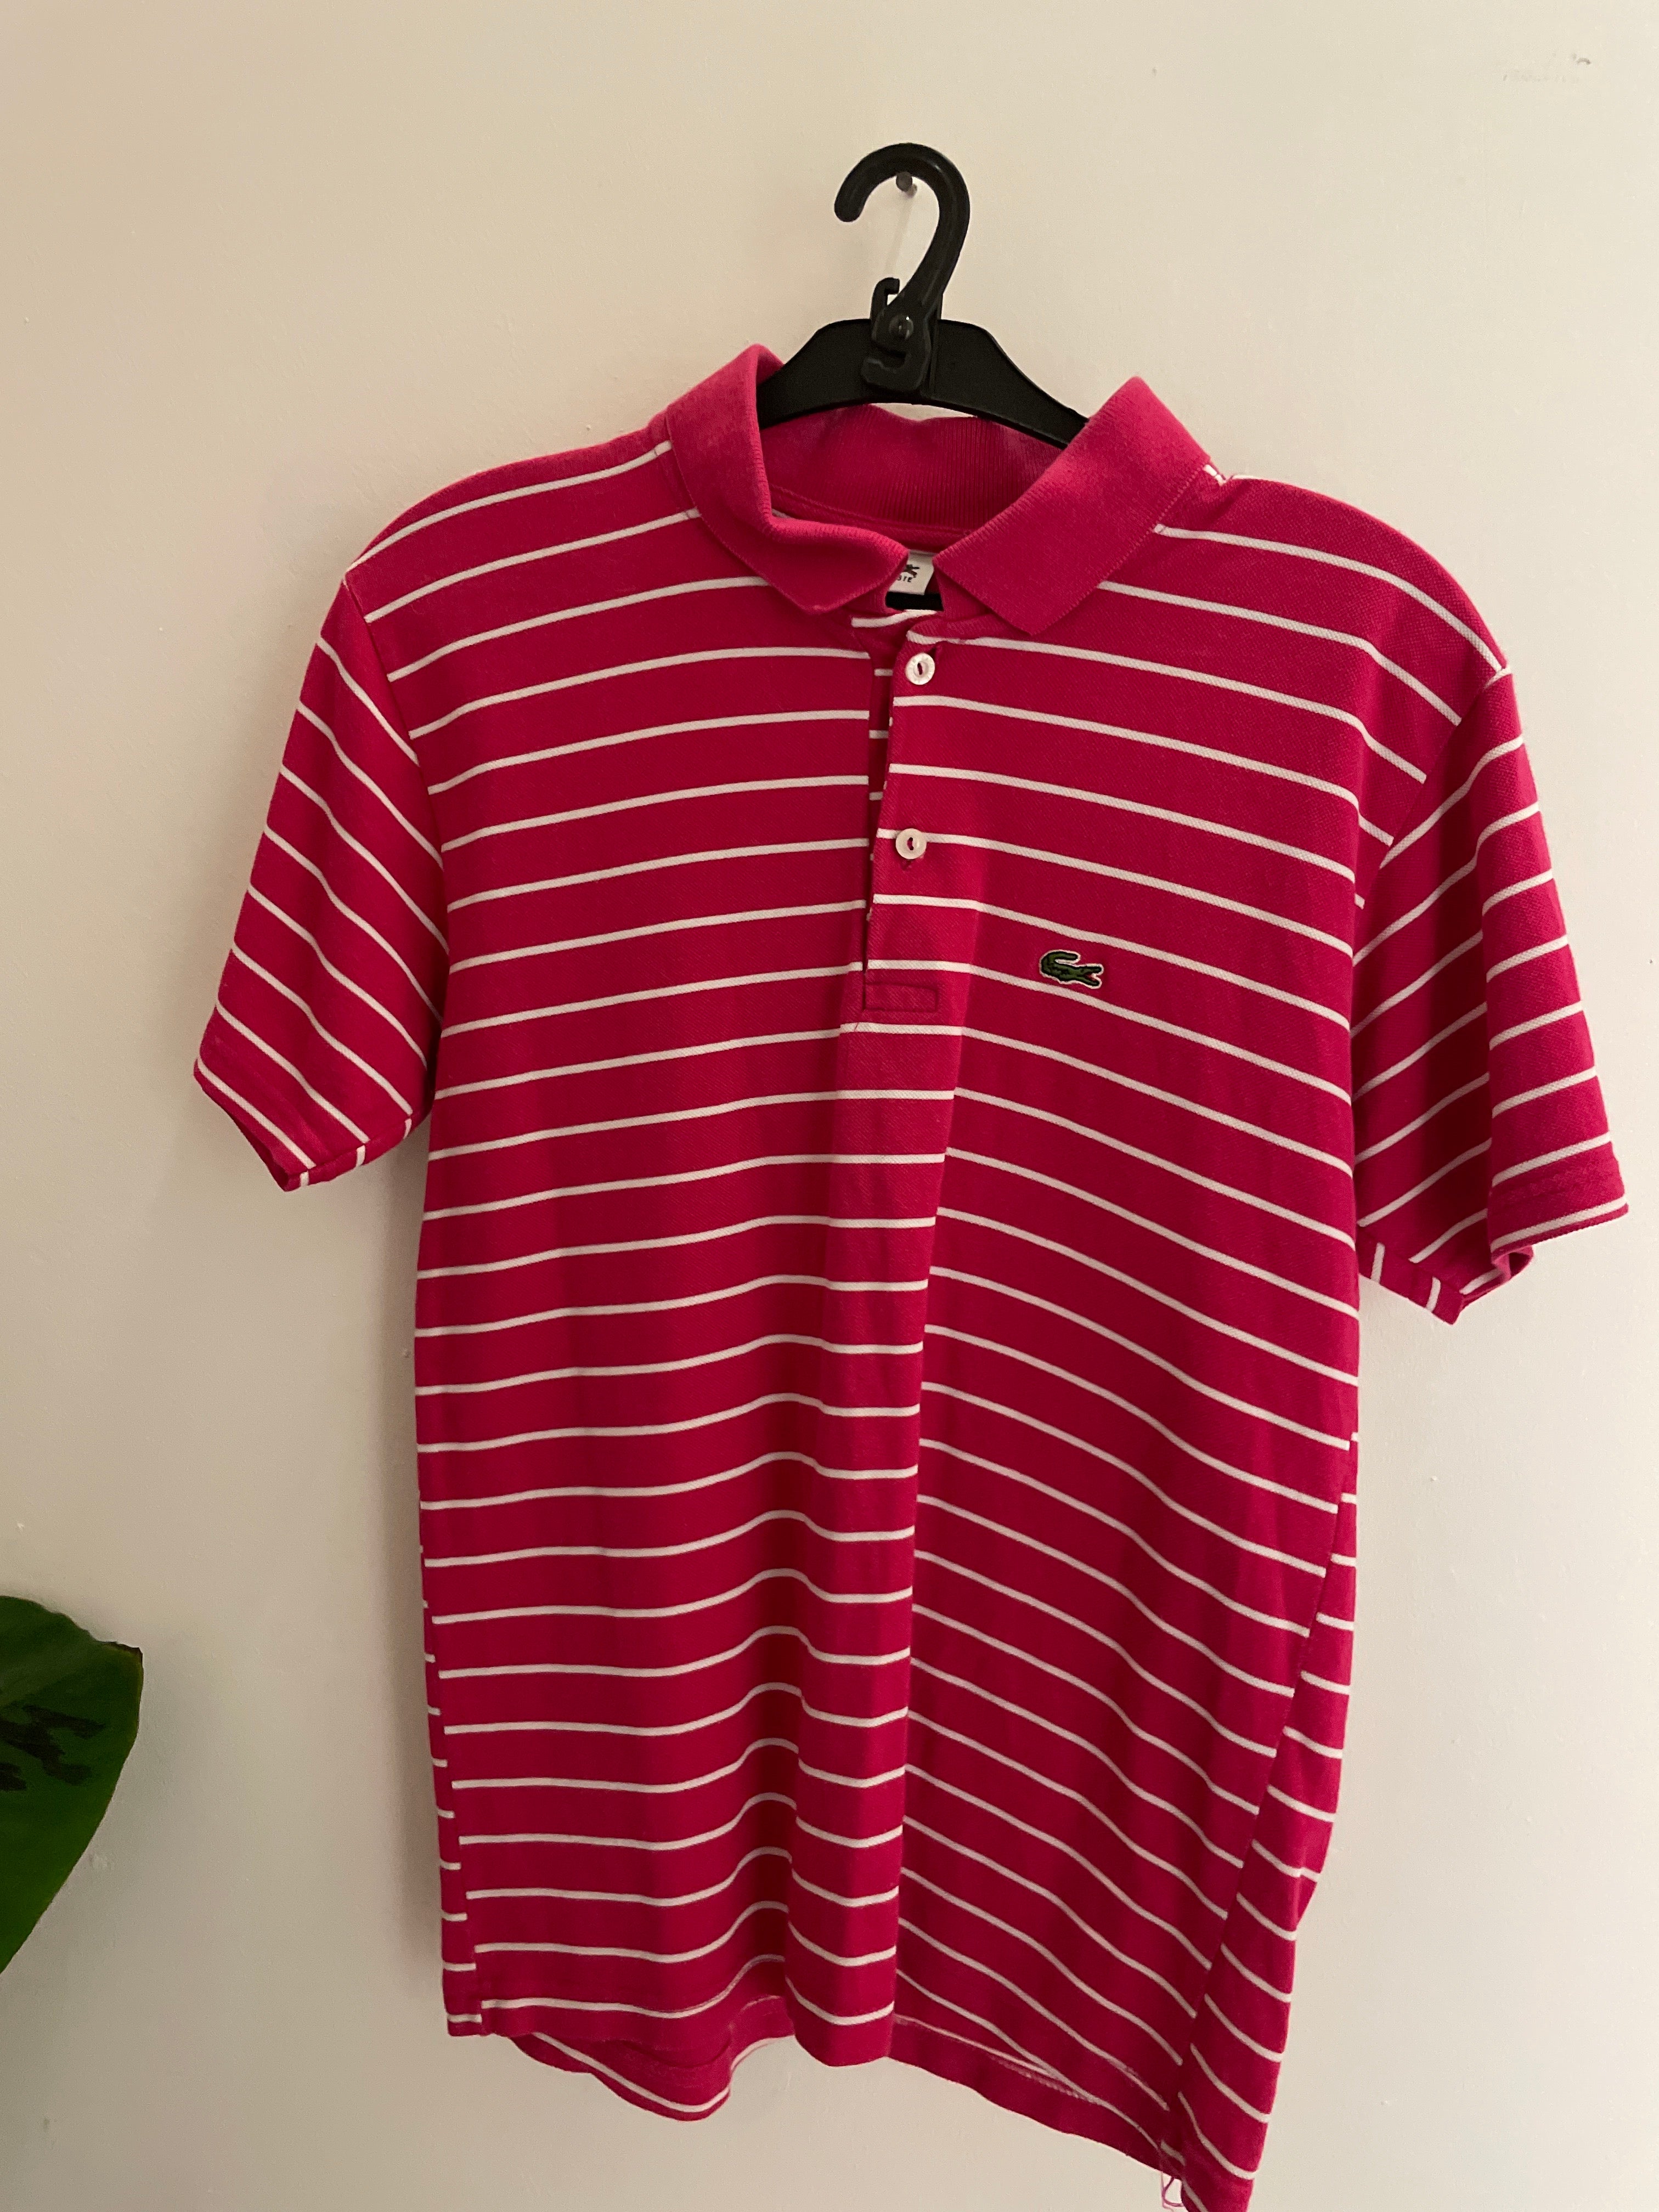 Vintage pink stripped lacoste sport polo shirt size S